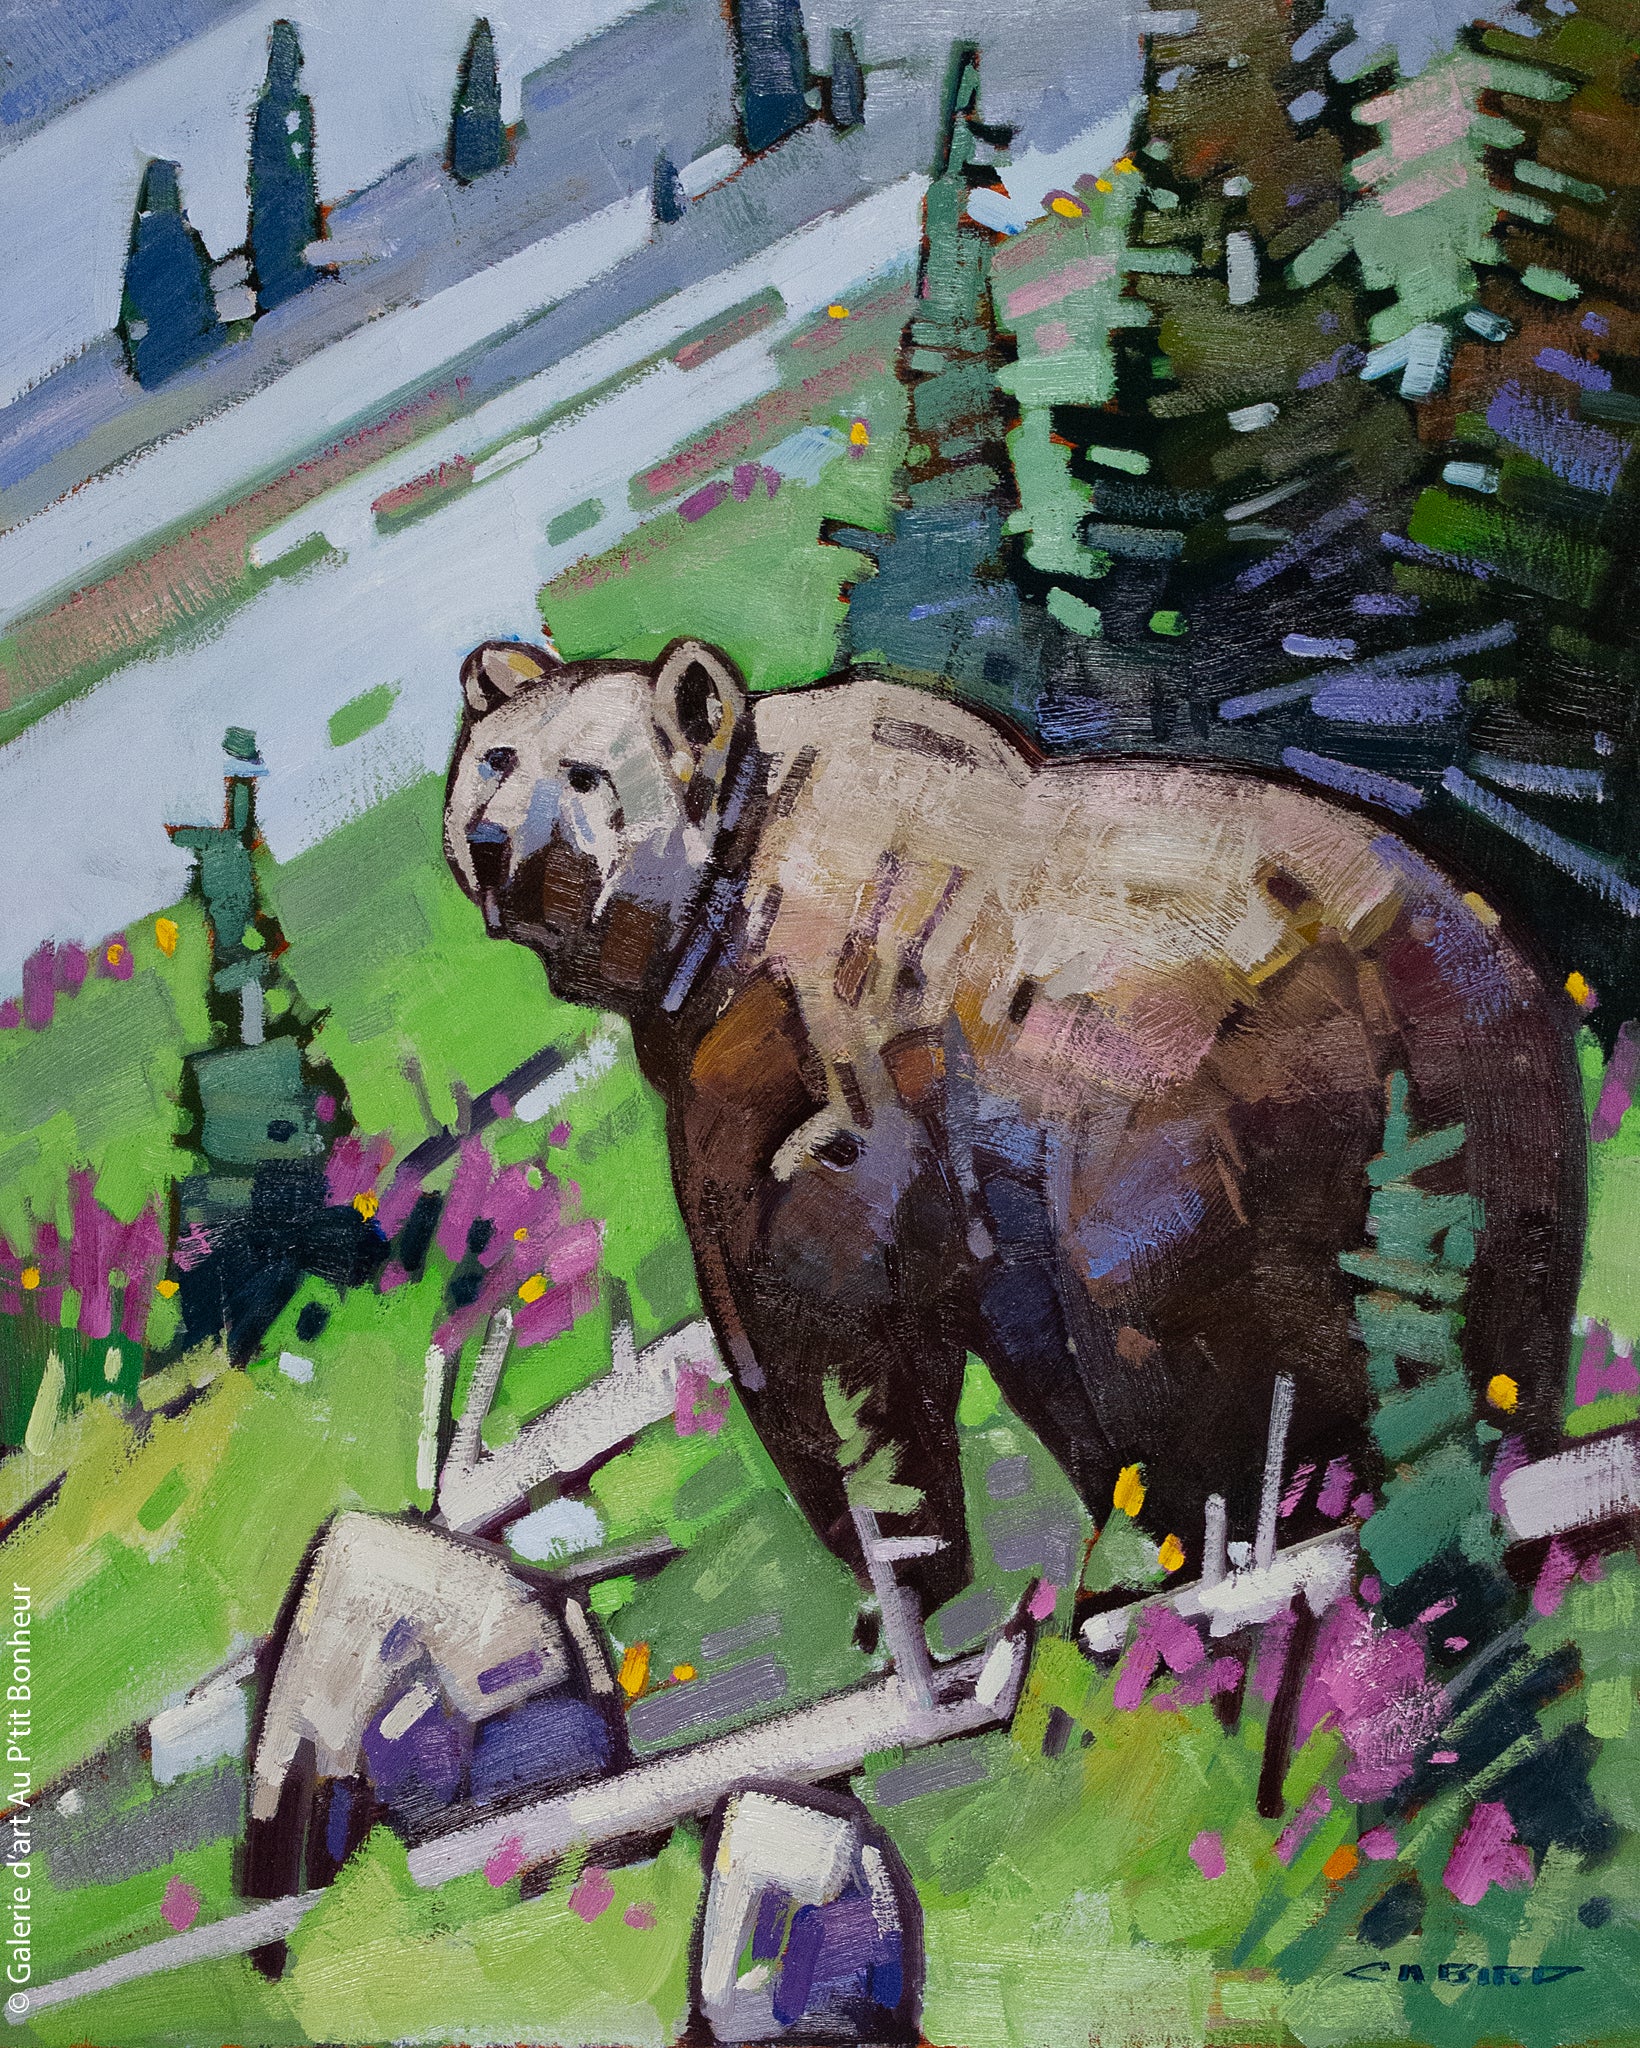 Cameron Bird | Summer Slope - Grizzly